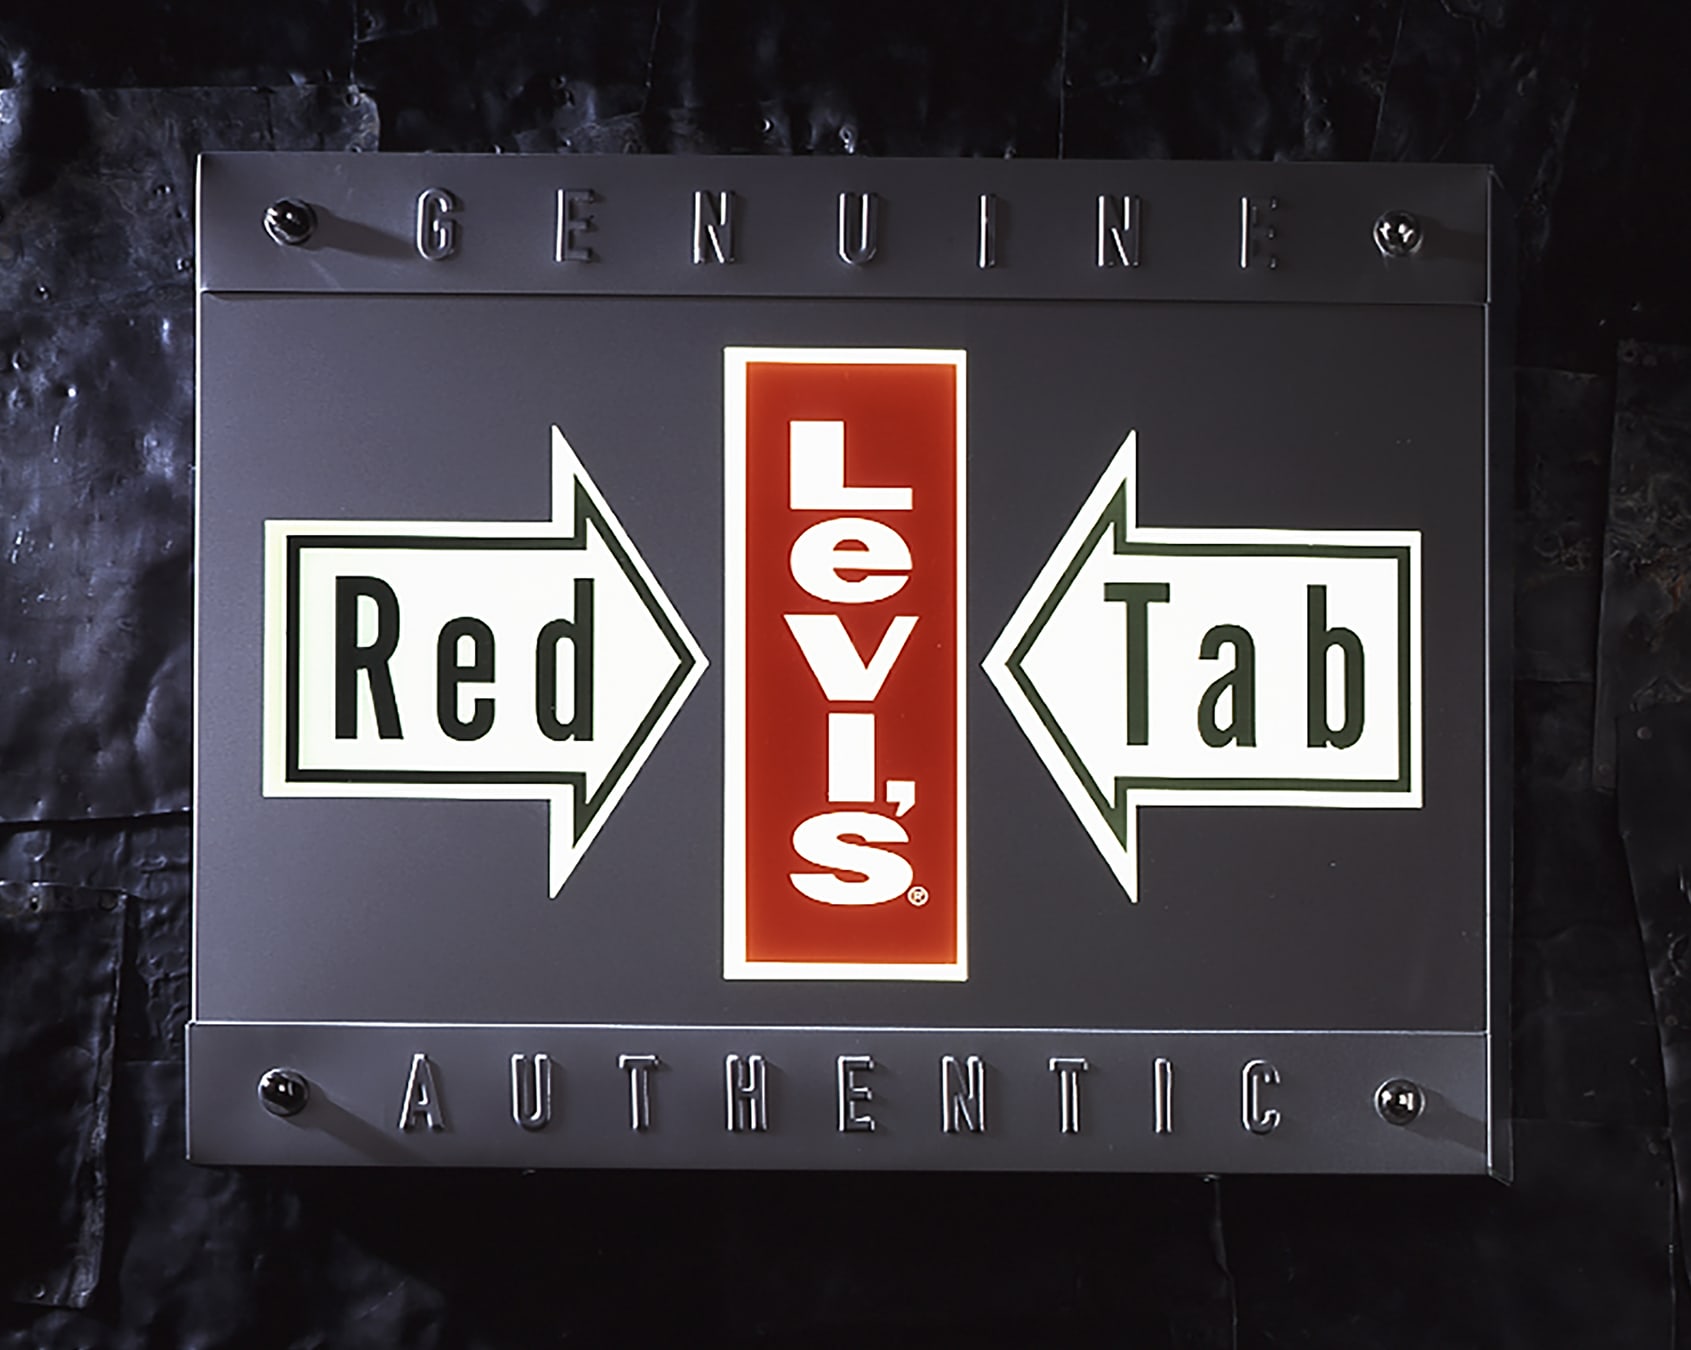 Levi’s Red Tab POS lighted sign design